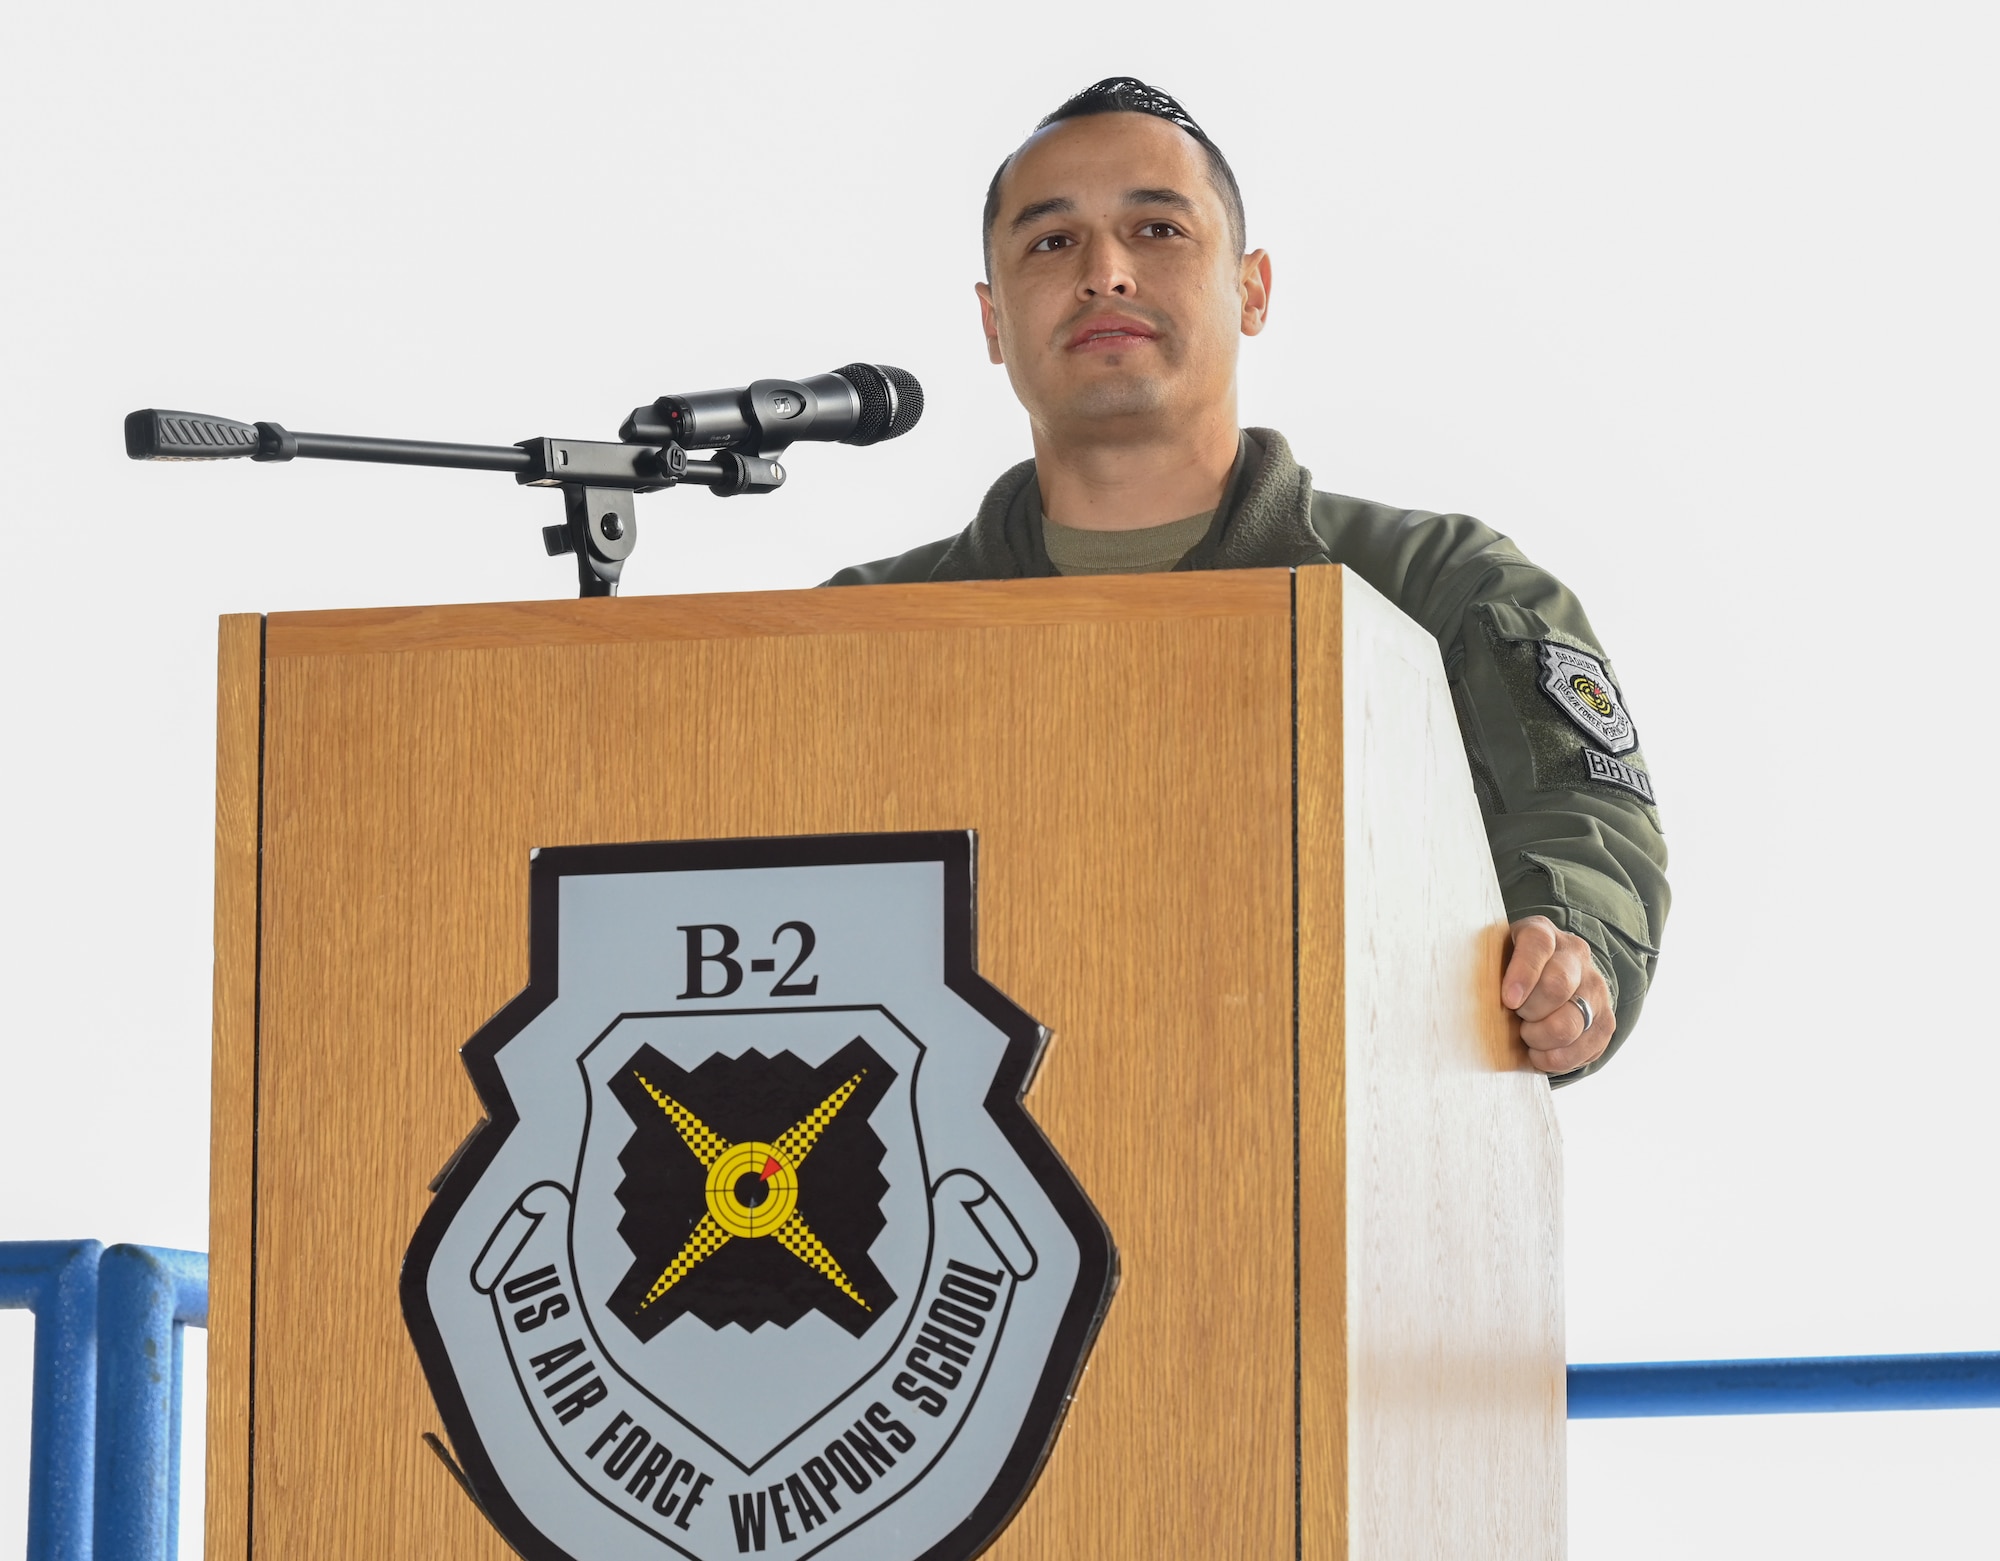 Lt. Col. Marcus Antonini, previous 325th Weapons Squadron, 57th Wing, speaks during a change of command at Whiteman Air Force Base, Missouri, December 14, 2022. Change of commands are a tradition dating back hundreds of years, with the U.S. Air Force adopting it from the U.S. Army. (U.S. Air Force photo by Airman 1st Class Joseph Garcia)